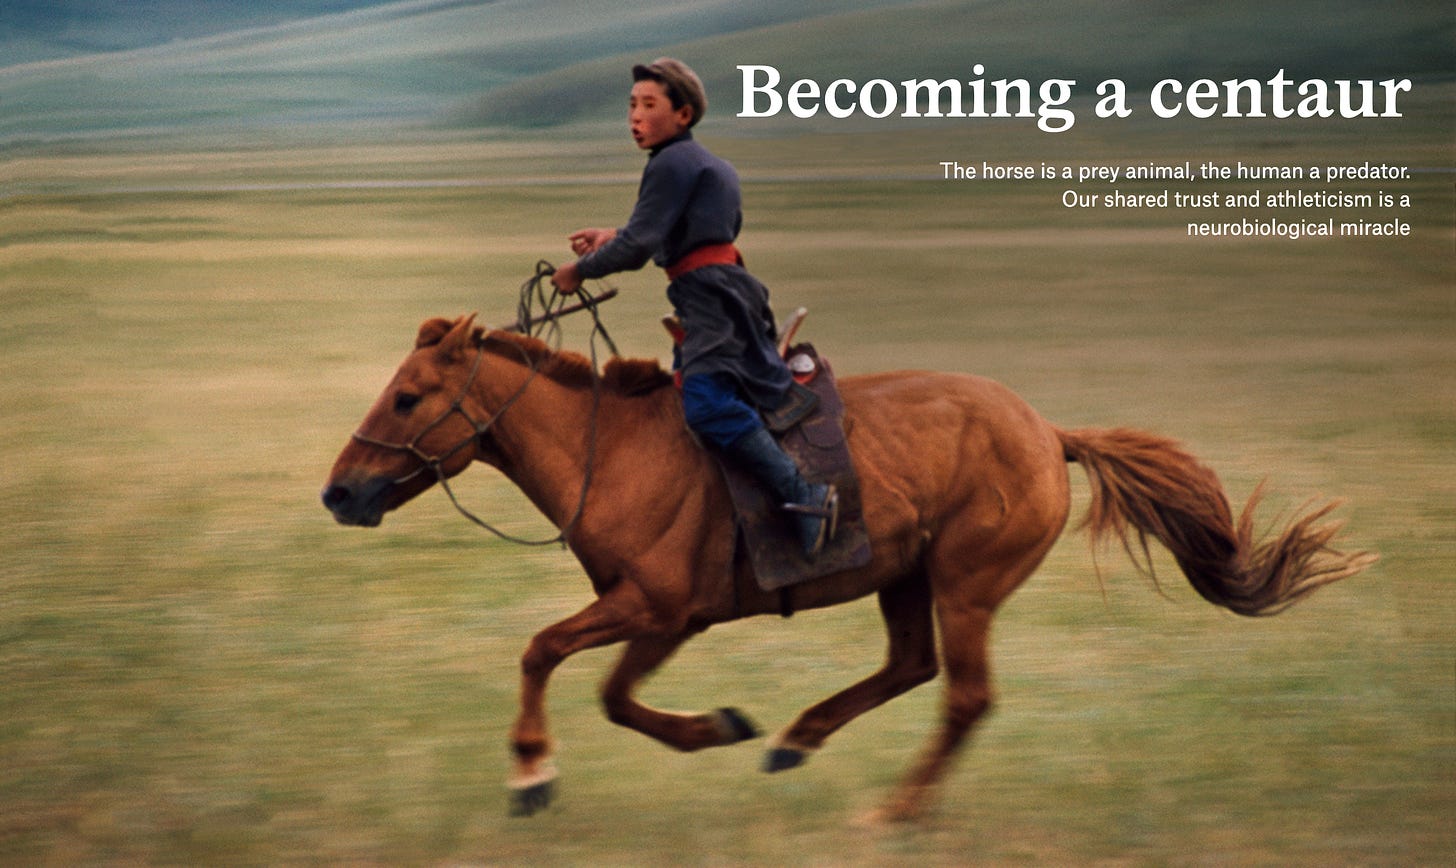 Photo cover for “Becoming a centaur” by Dr. Janet Jones on Aeon.